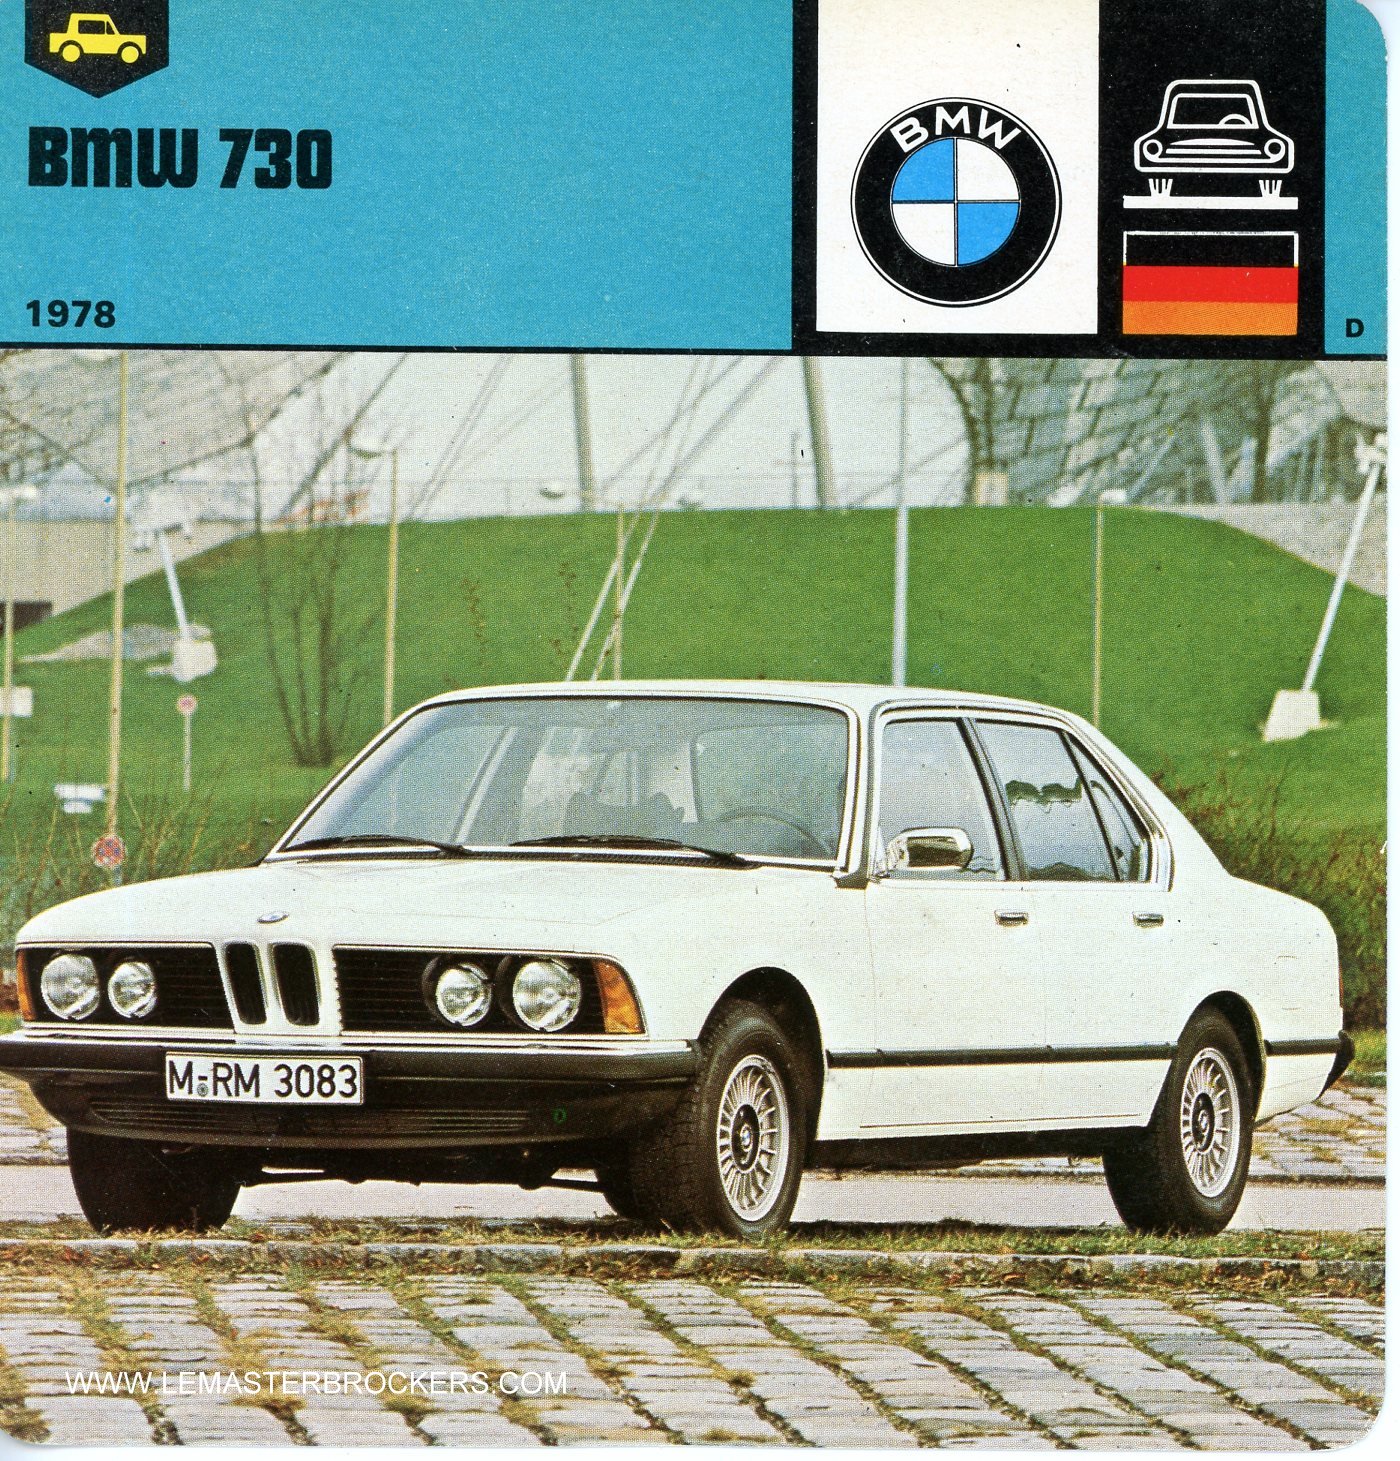 FICHE AUTO BMW 730 CARS-CARD LEMASTERBROCKERS